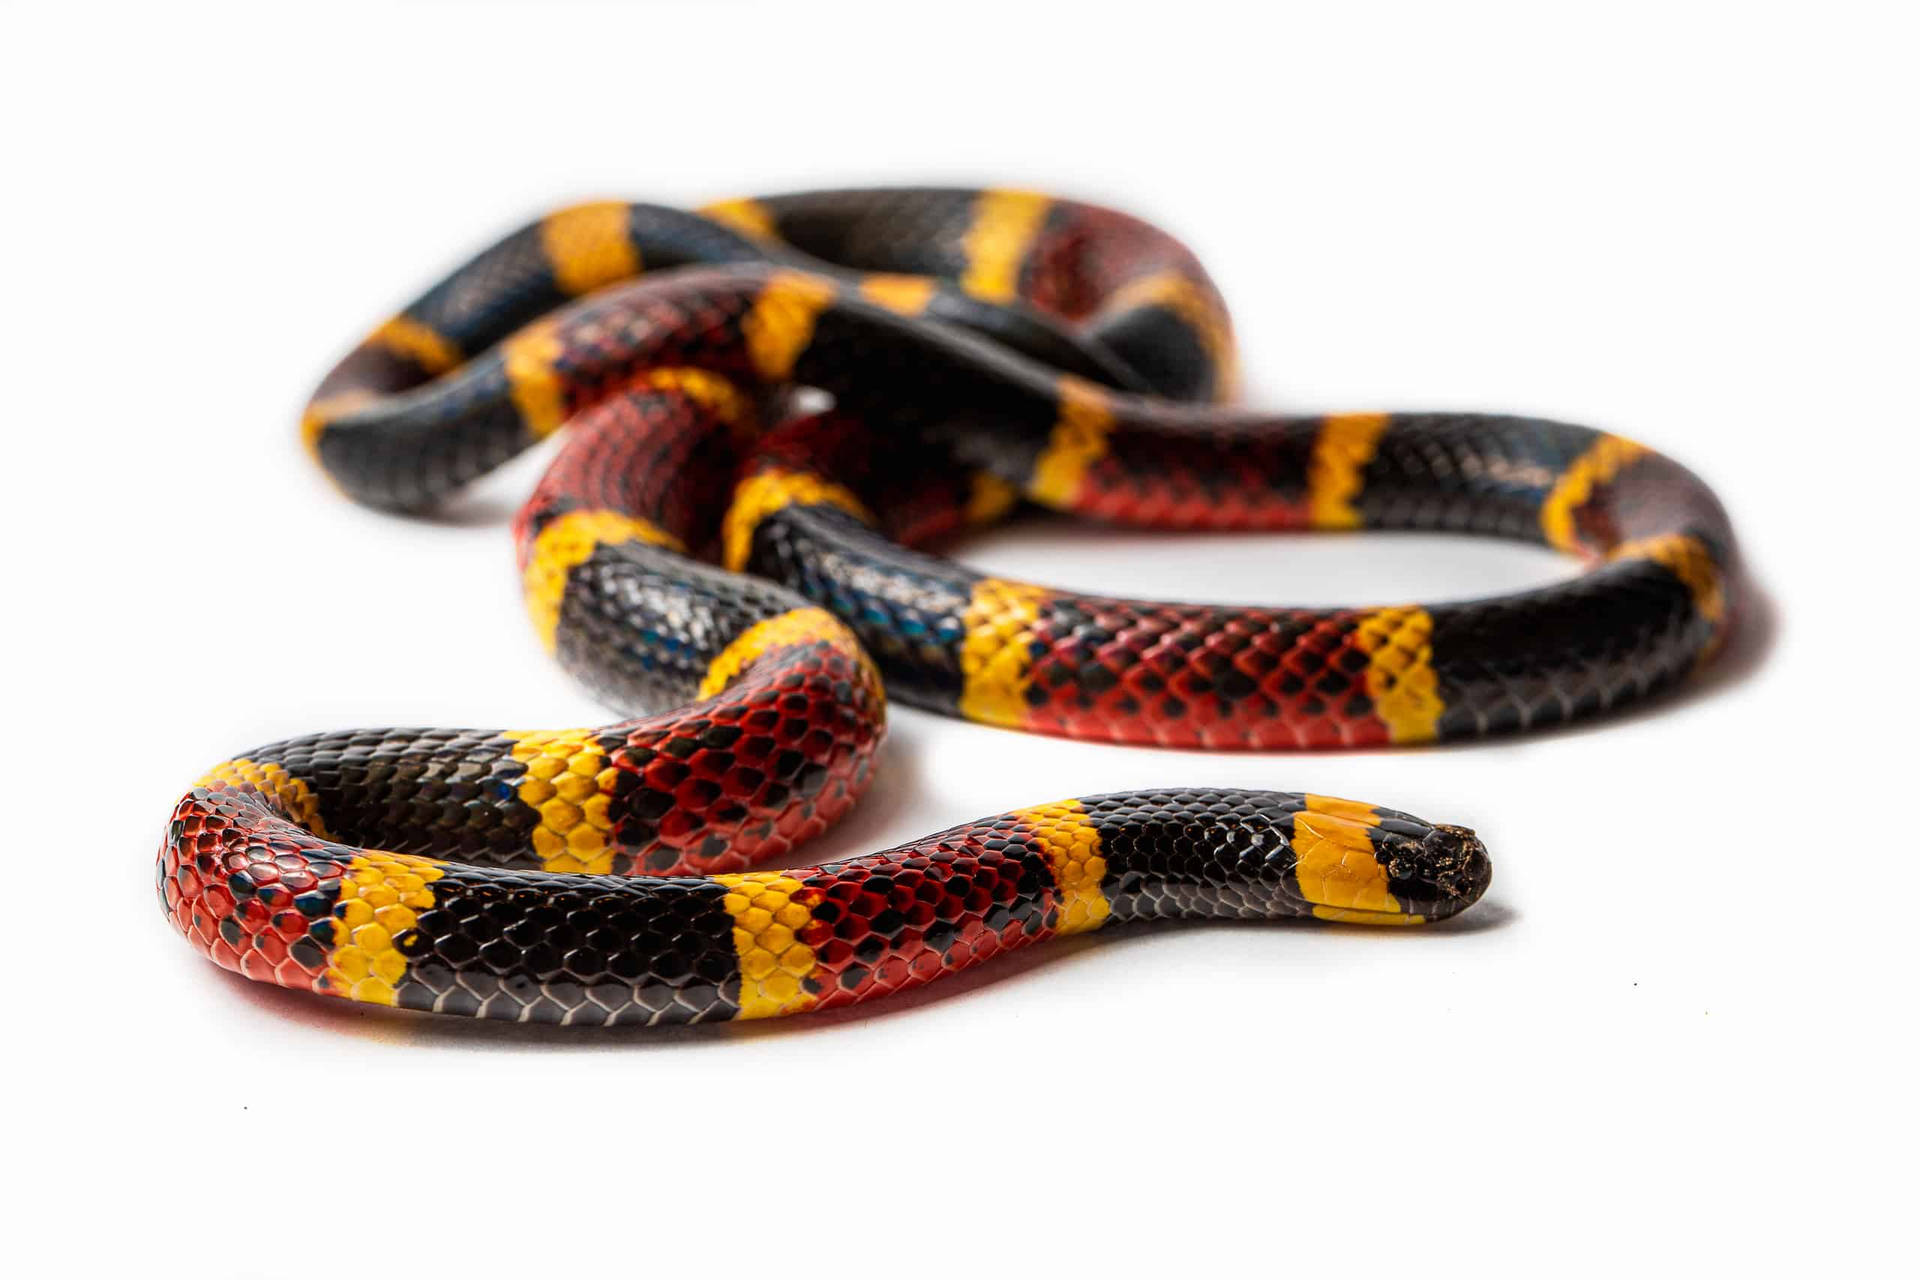 Free Coral Snake Wallpaper Downloads, [100+] Coral Snake Wallpapers for  FREE 